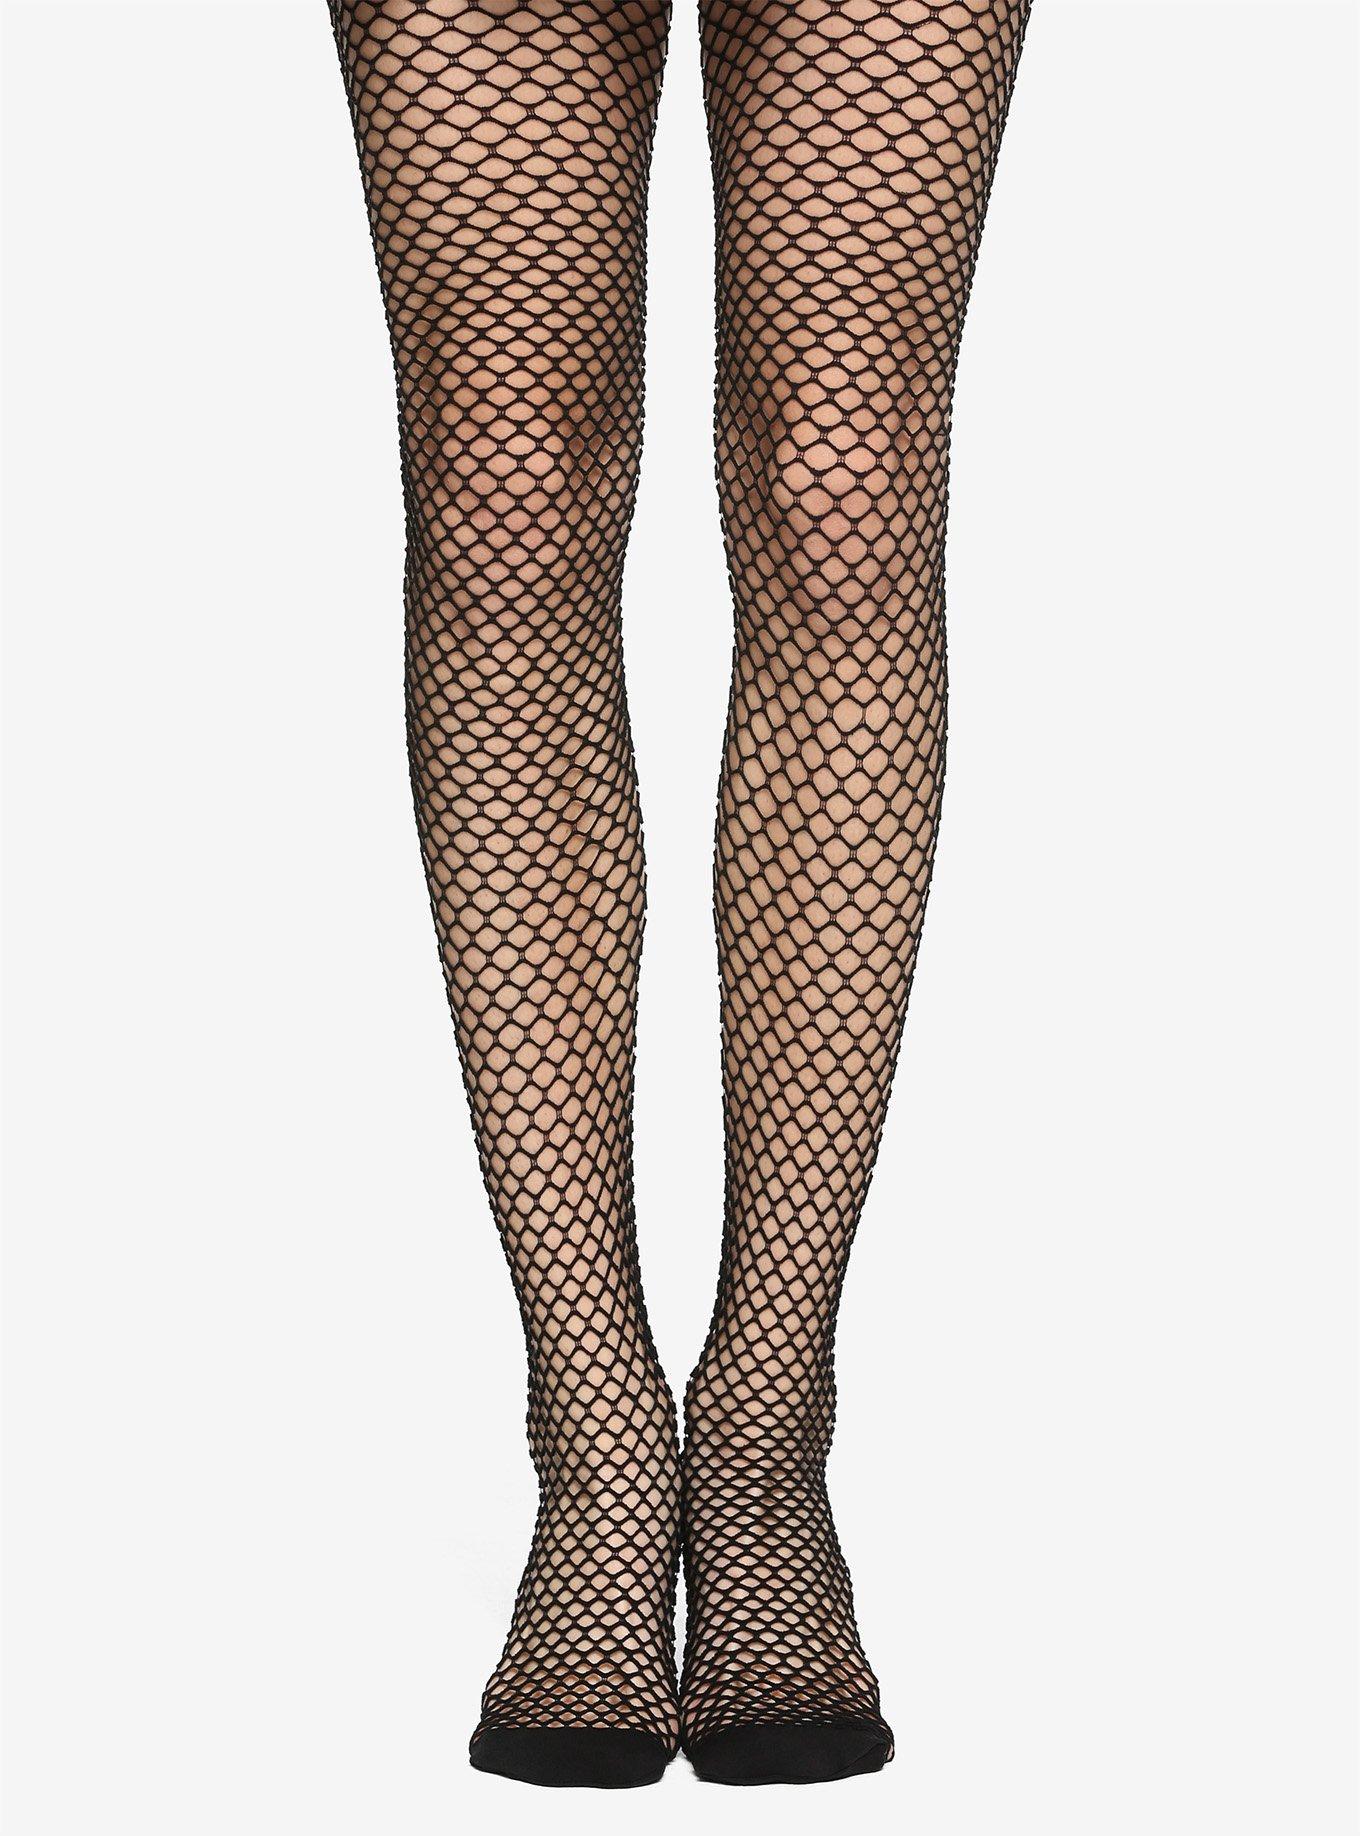  MUSIC LEGS Women's Ripped Net Holes Spandex Tights, Black, One  Size: Clothing, Shoes & Jewelry